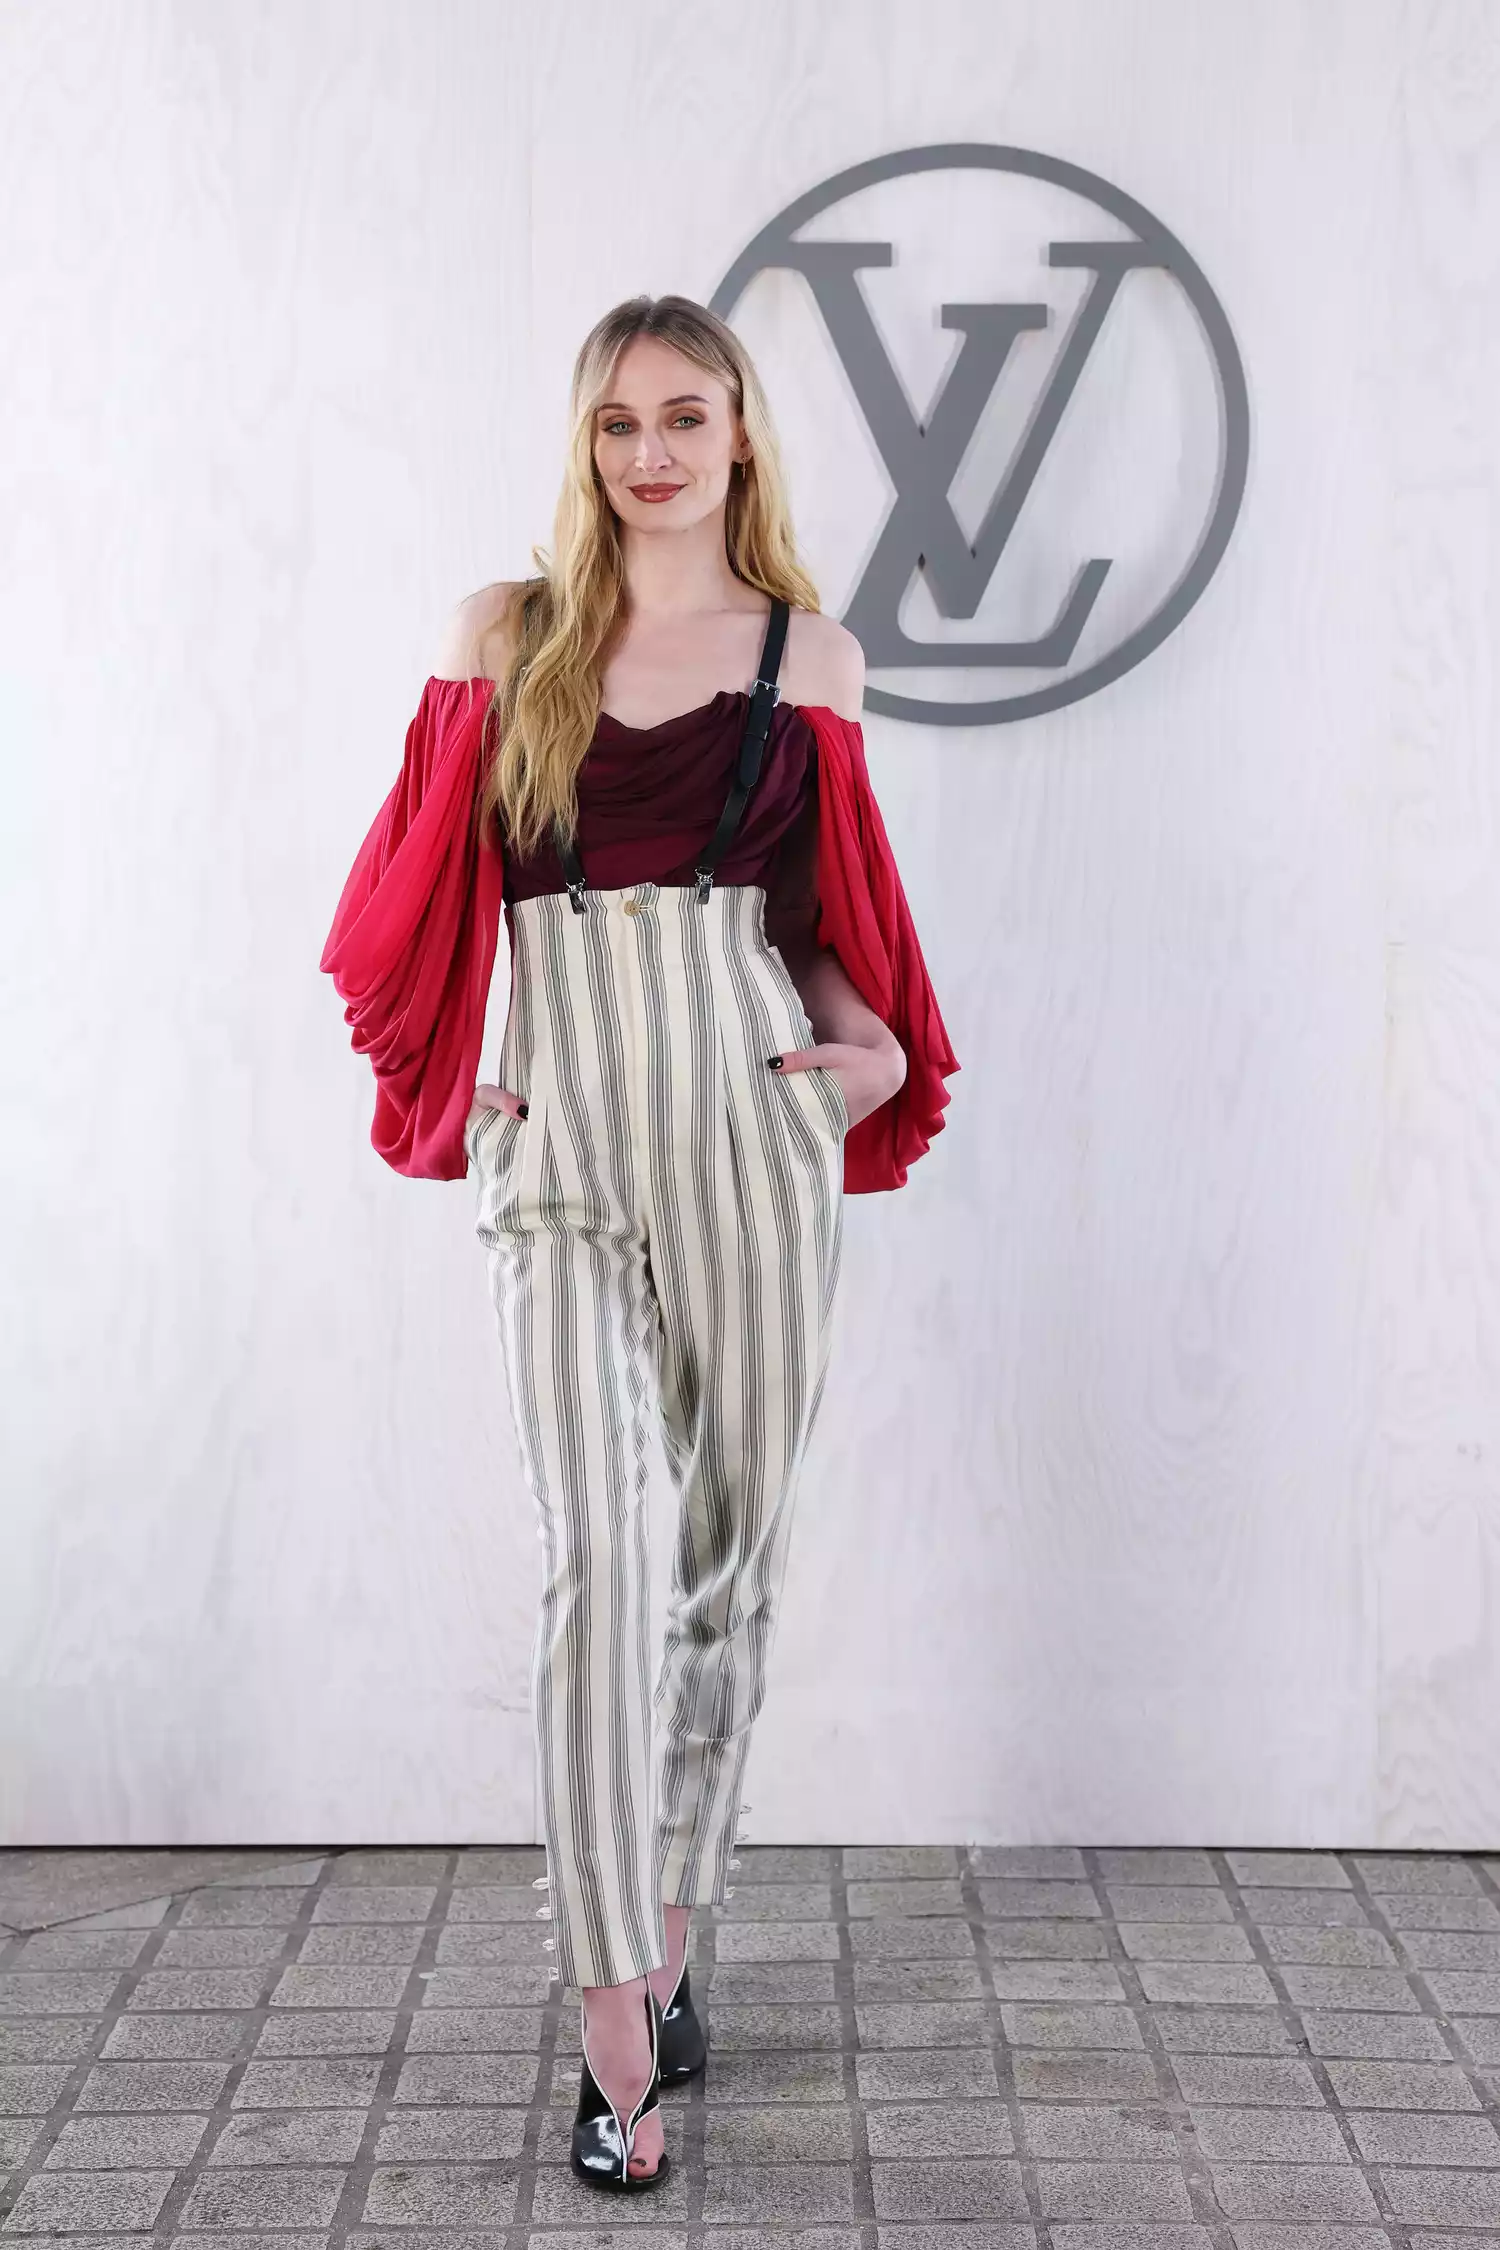 Sophie Turner Ditched Her Rigid Jeans for Comfy Party Pants